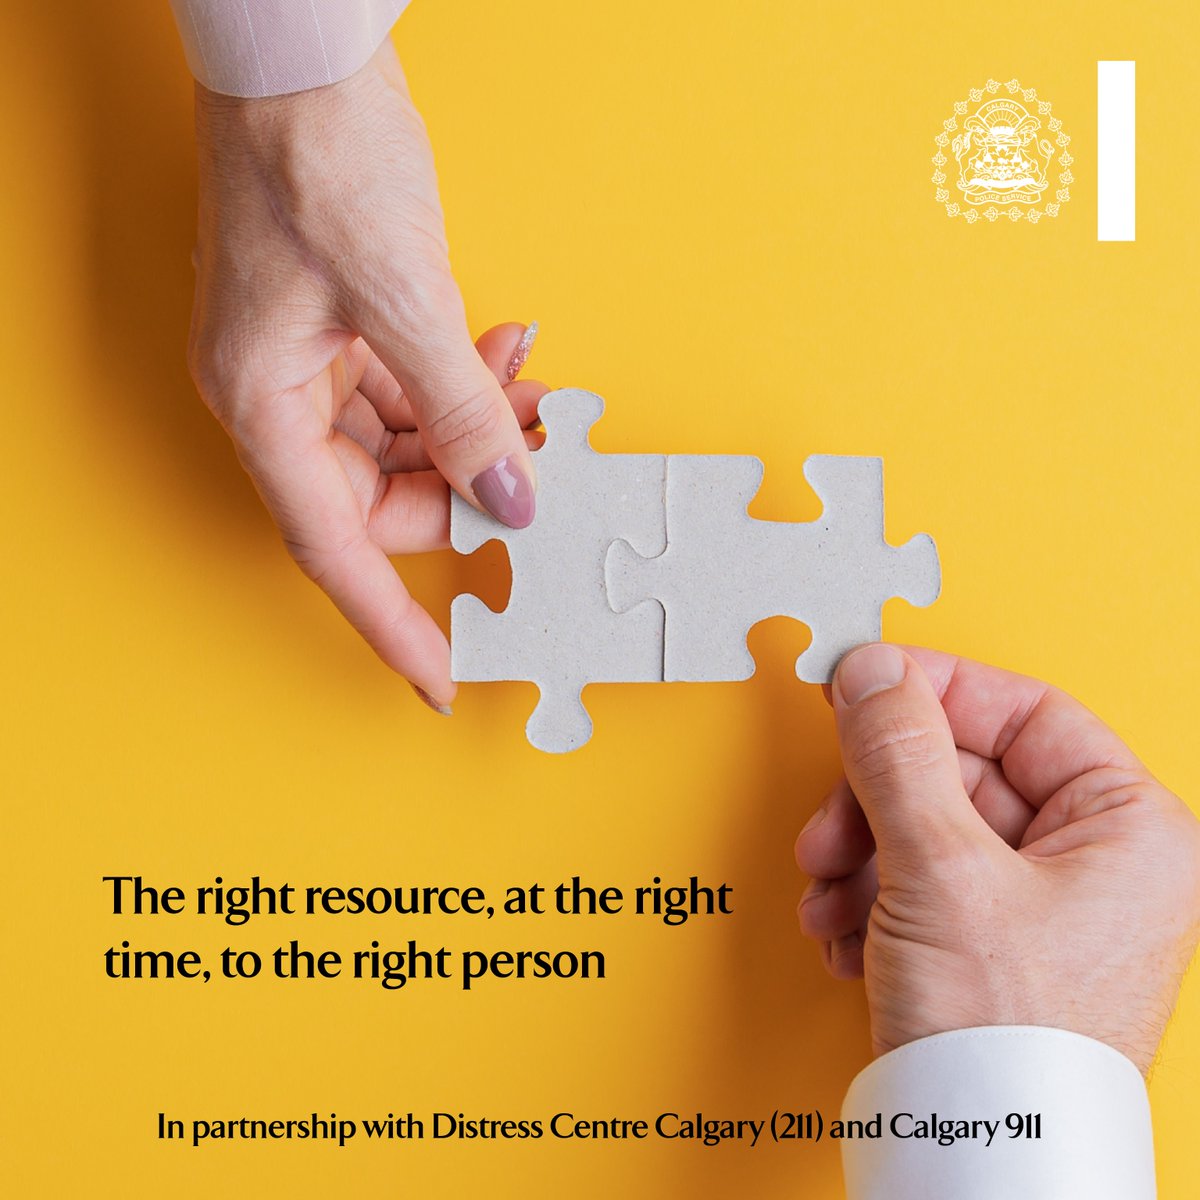 💛 Compassion is one of our core values & drives how we respond to every call. This #MentalHealthWeek, show compassion to those around you. 🤝 We work with @Distress_Centre, @211calgary & @cityofcalgary 911 to provide the right resource, to the right person, at the right time.